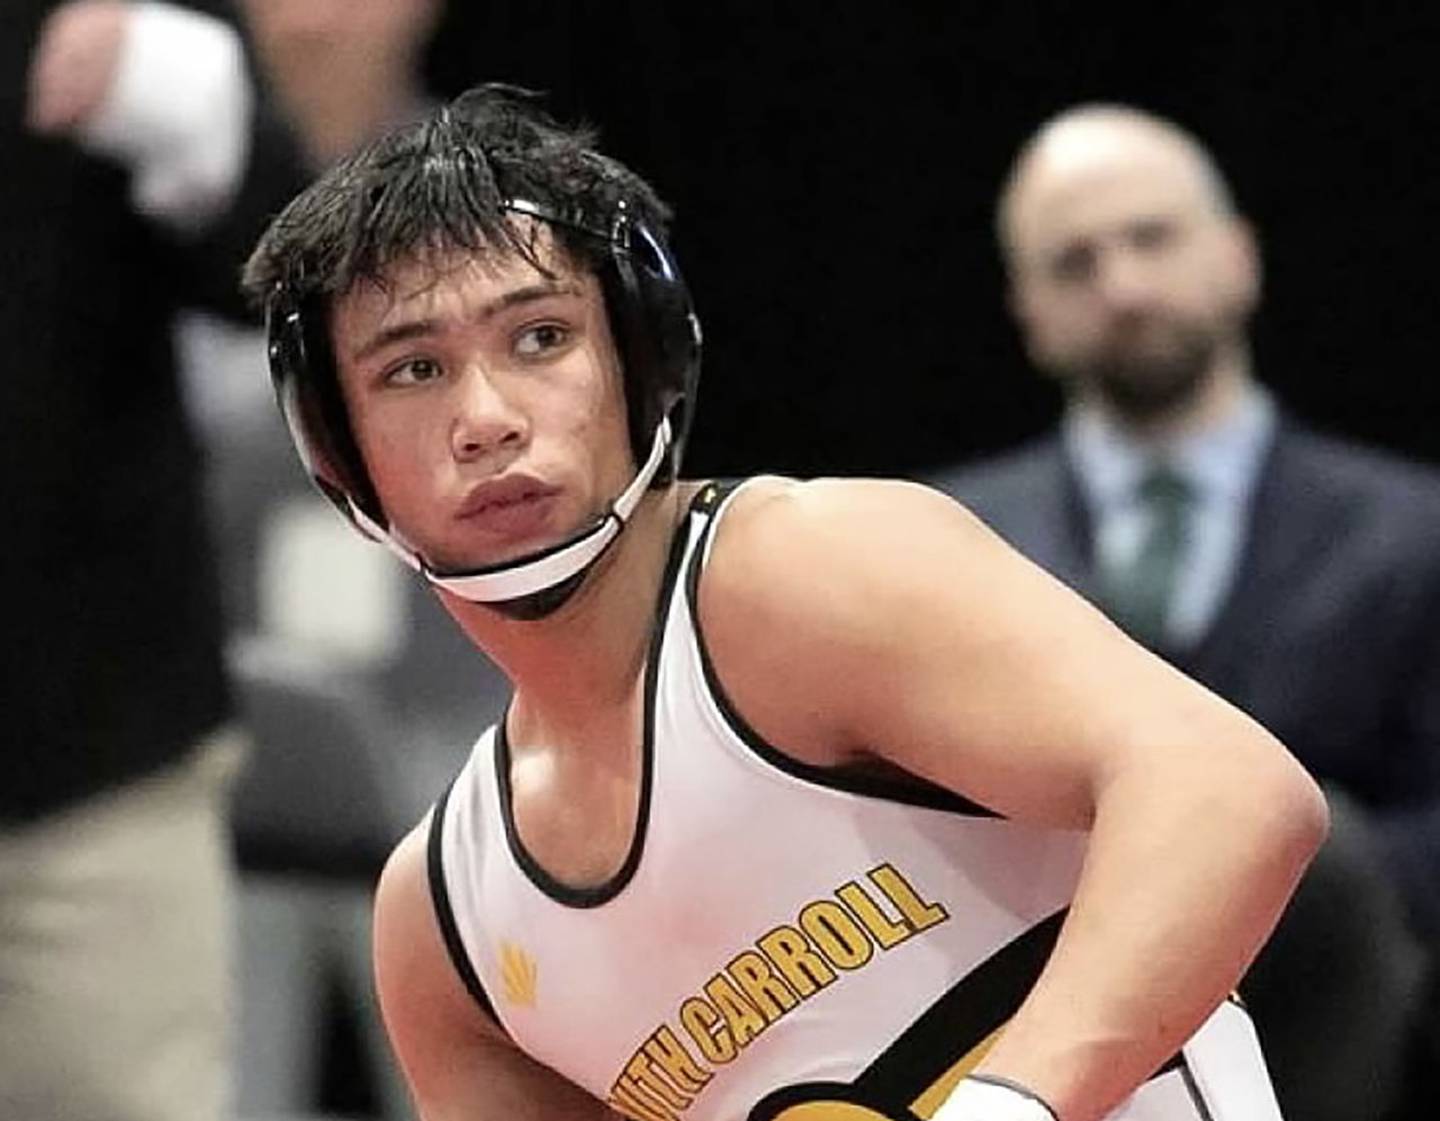 One of the center pieces of the South Carroll wrestling team, which was one of the public school programs in state history during the 2022-23 season, AJ Rodrigues won the third state championship of his career. He is the 2022-23 Baltimore Banner/VSN Upper Weight Wrestler of the Year.